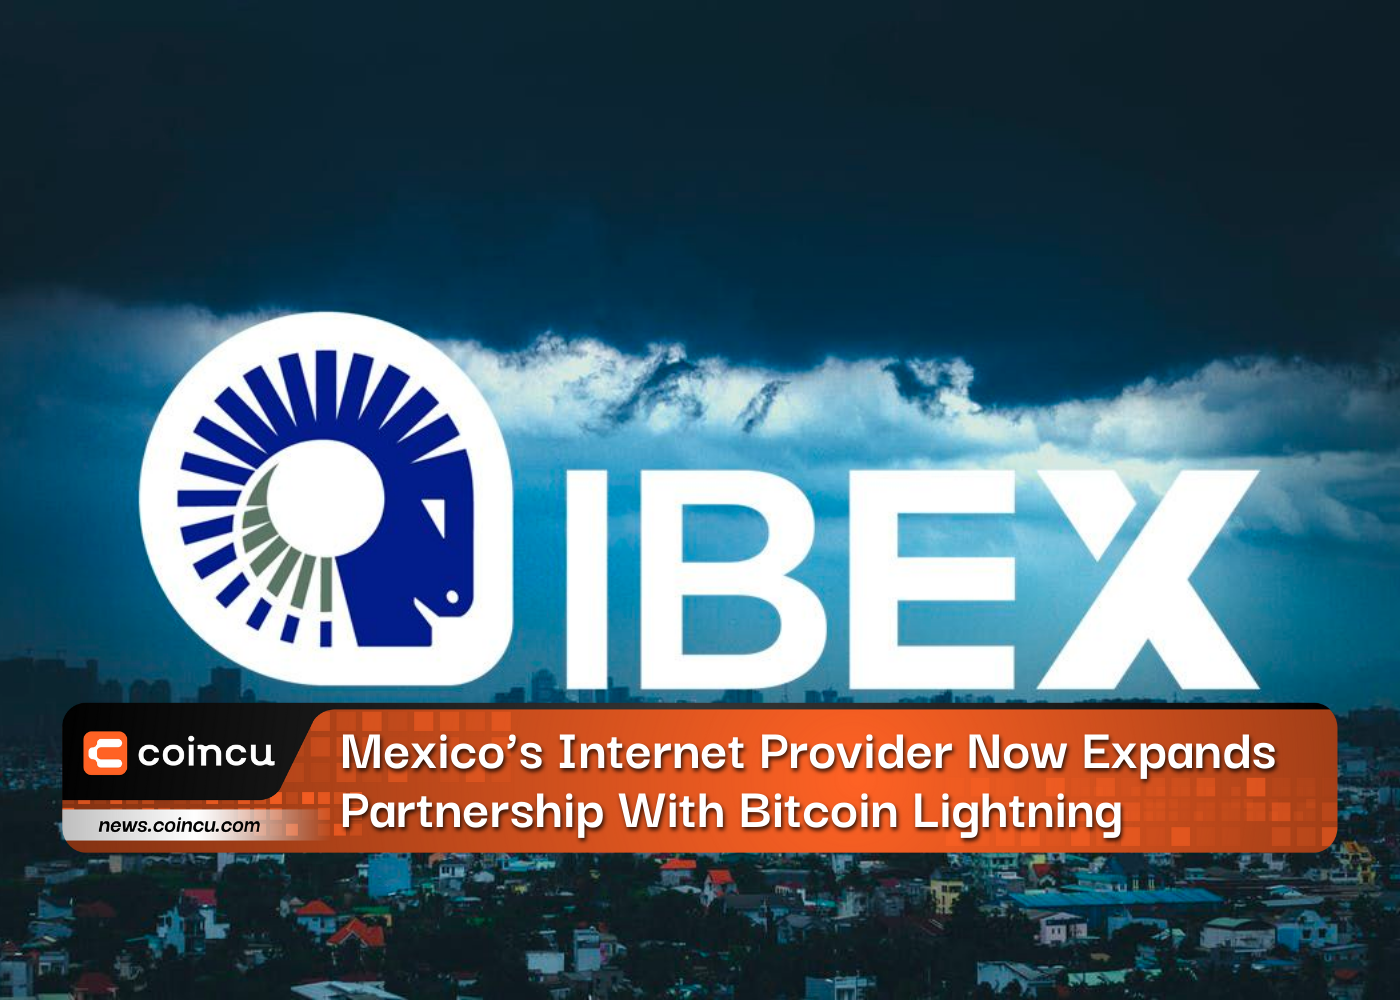 Mexico’s Internet Provider Now Expands Partnership With Bitcoin Lightning